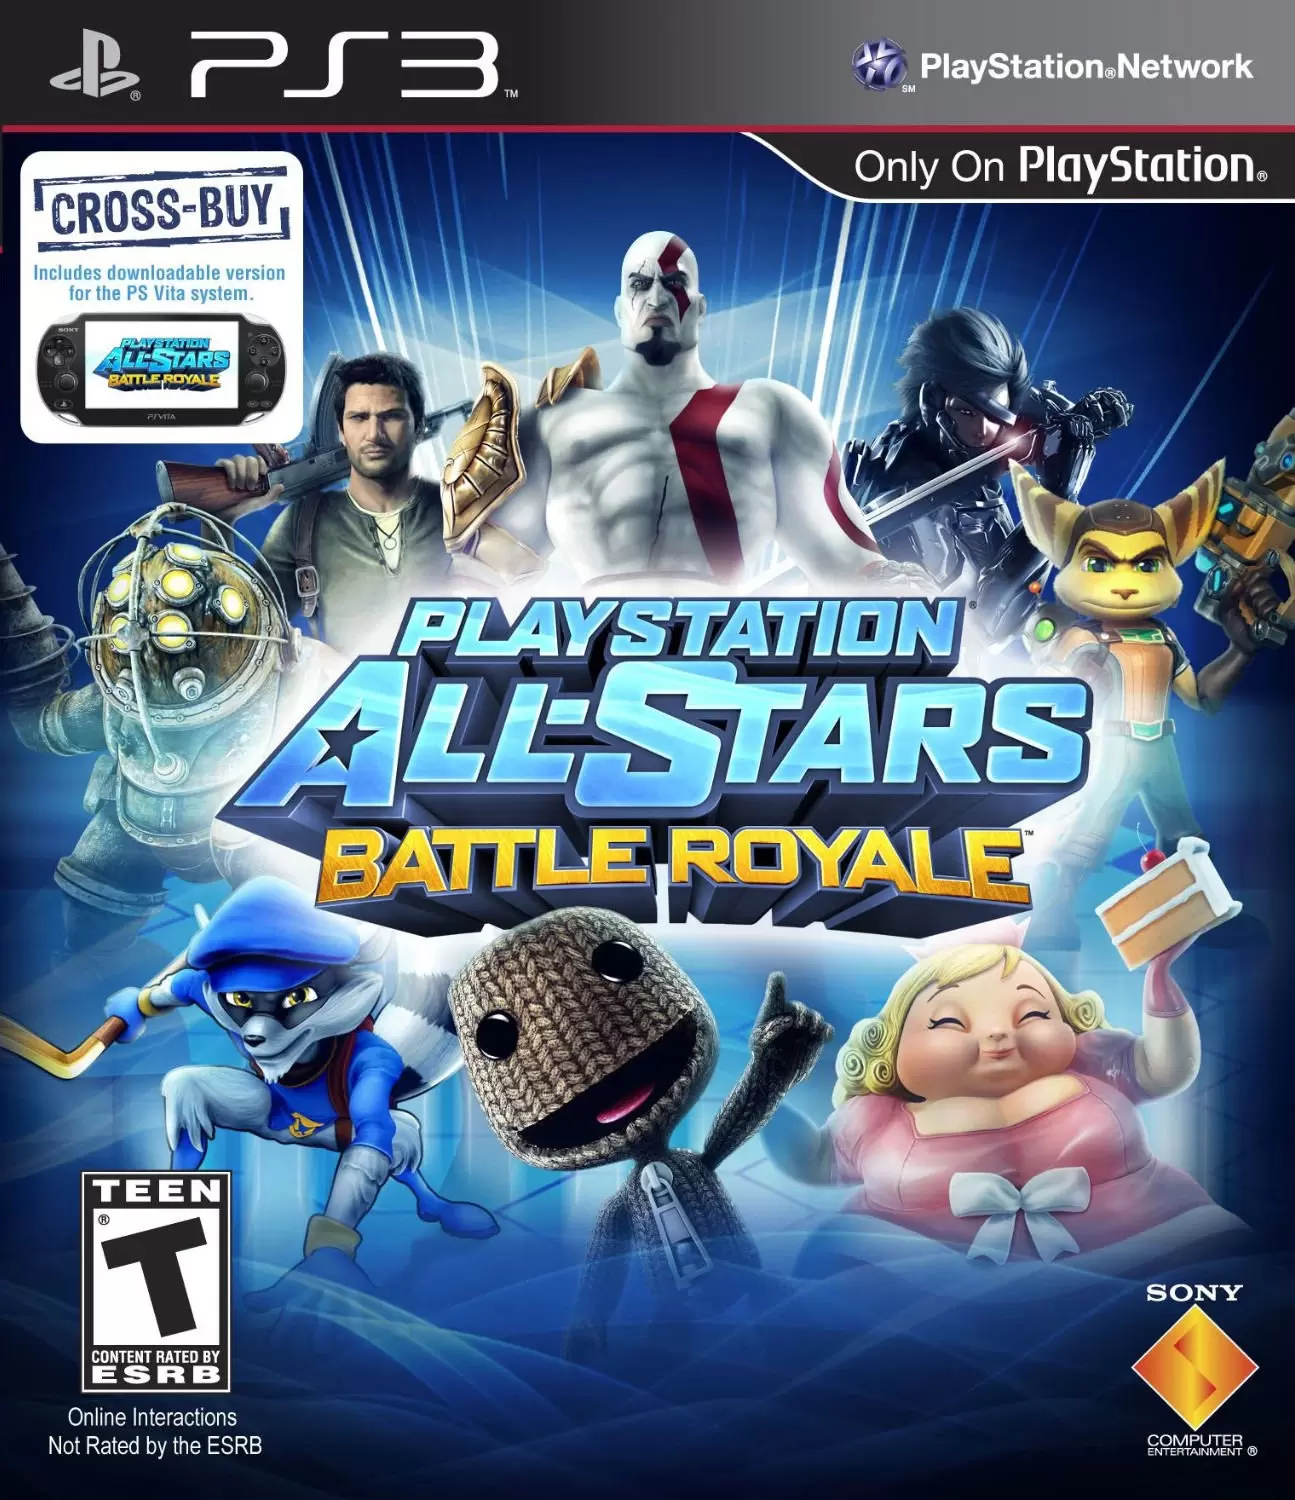 PS3 Games - PlayStation All-Stars Battle Royale